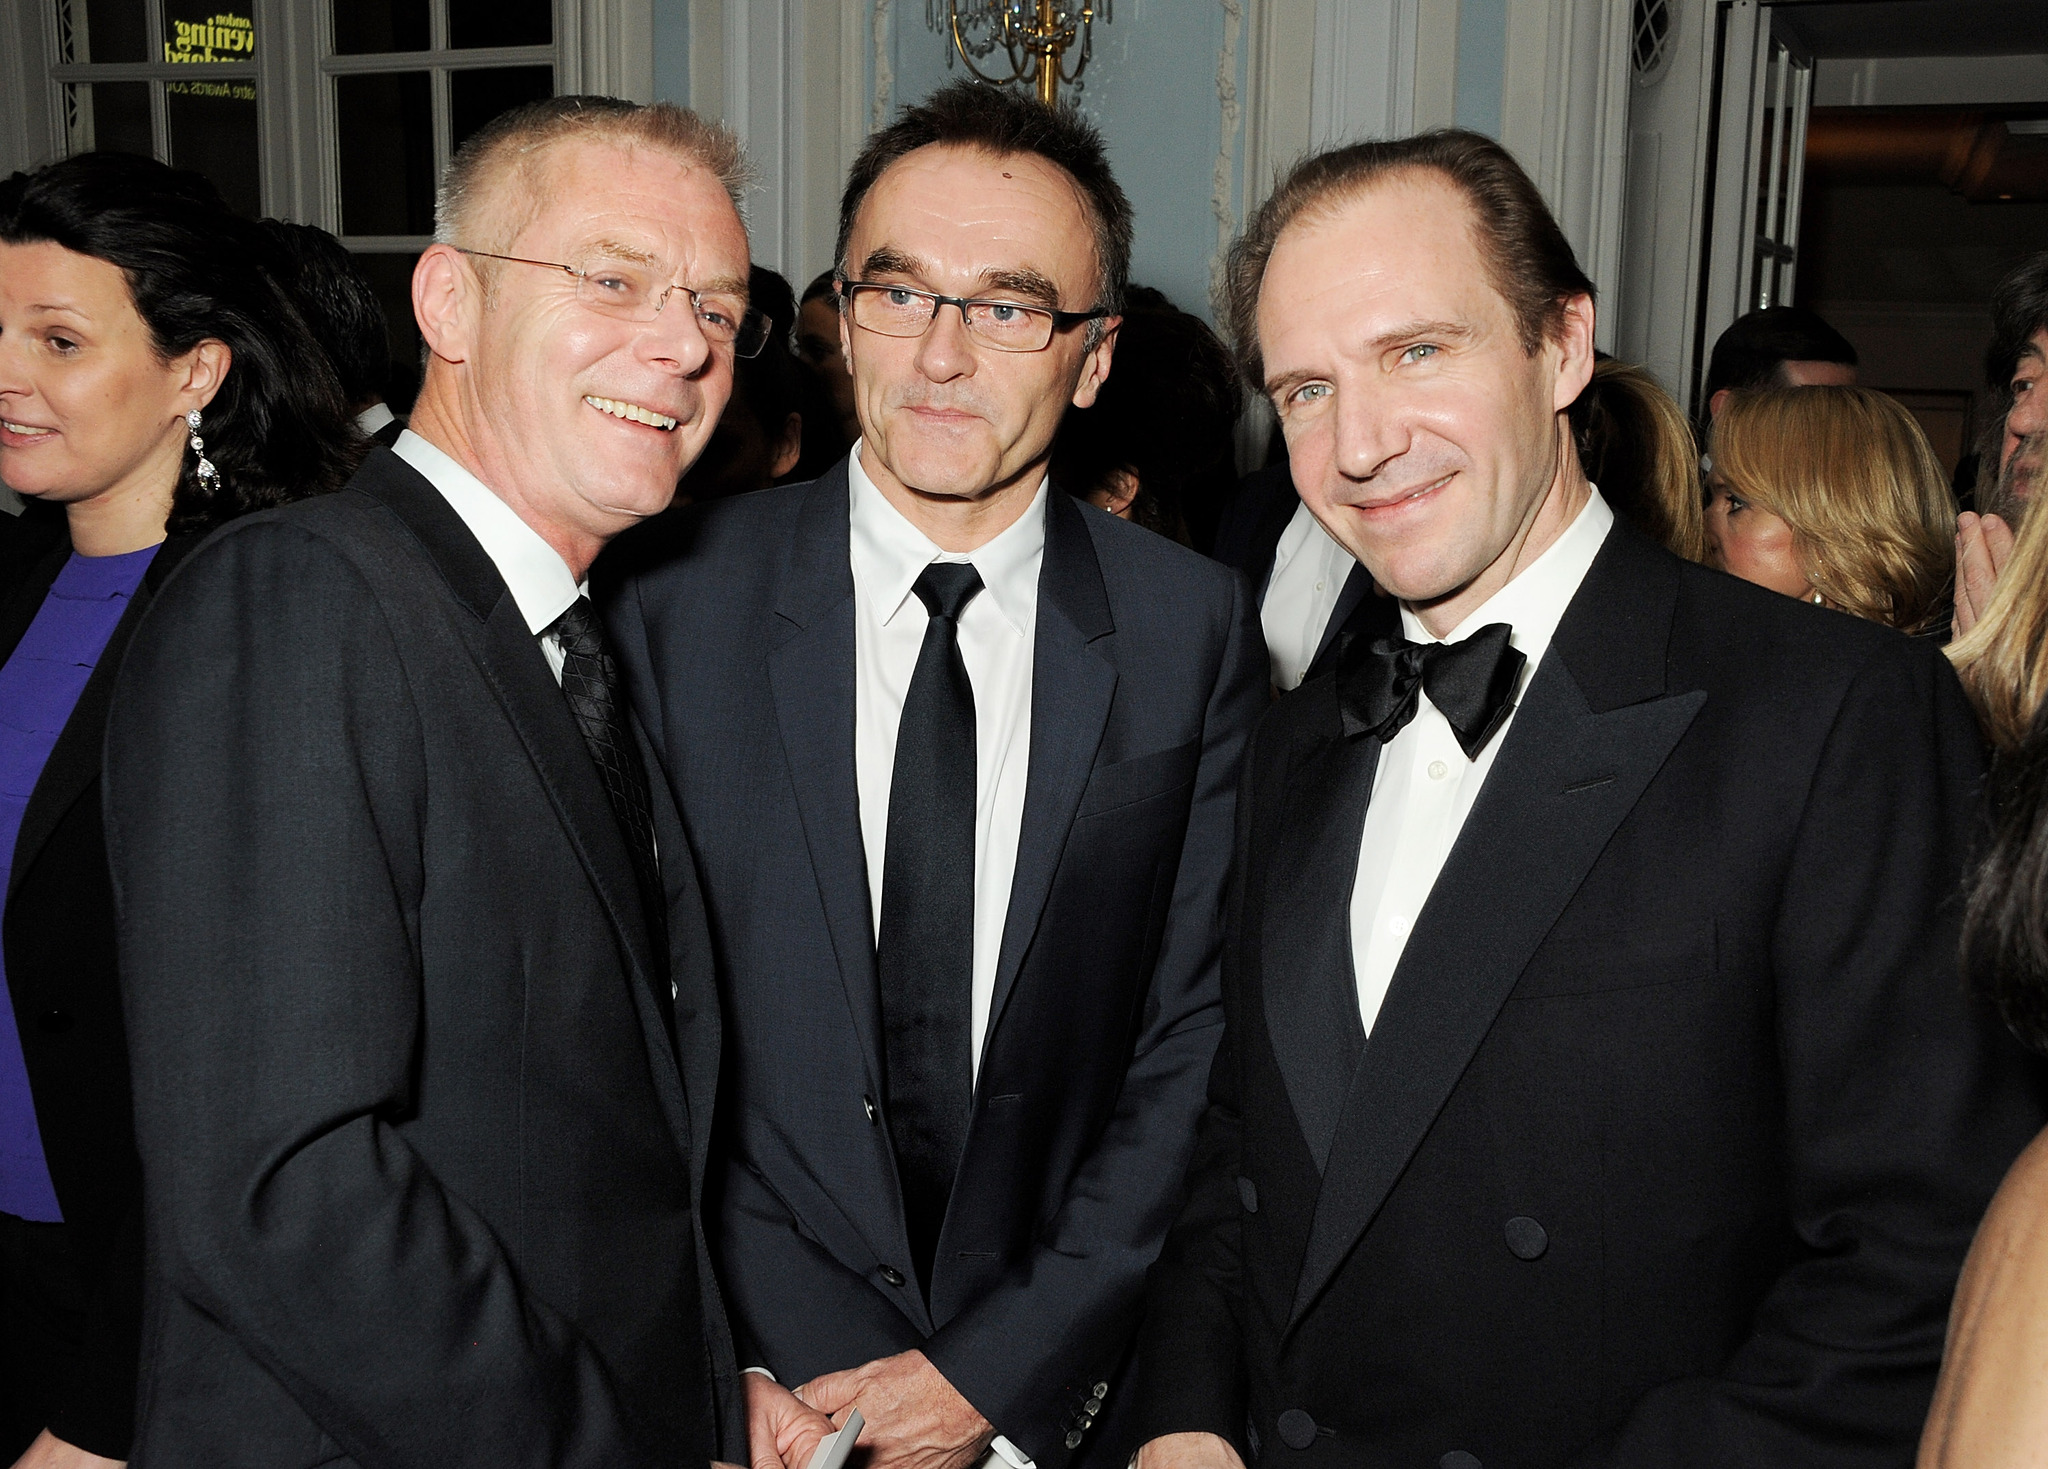 Ralph Fiennes, Danny Boyle and Stephen Daldry